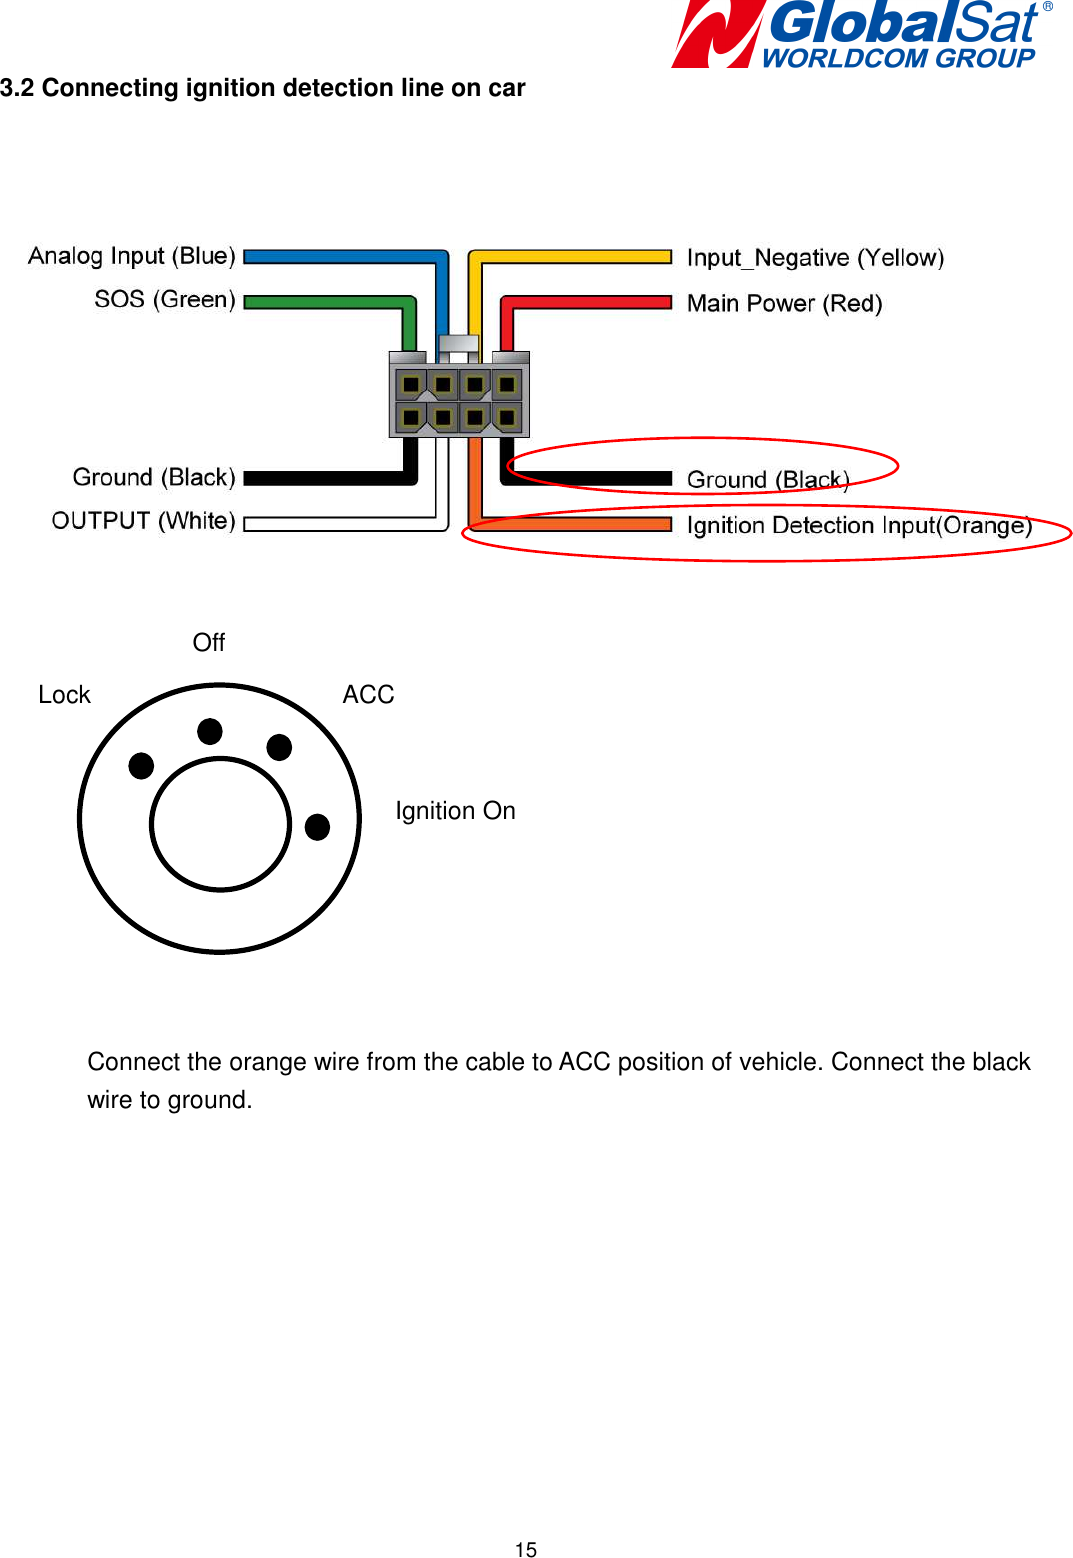   153.2 Connecting ignition detection line on car              Connect the orange wire from the cable to ACC position of vehicle. Connect the black wire to ground.            Ignition On ACC Off Lock 